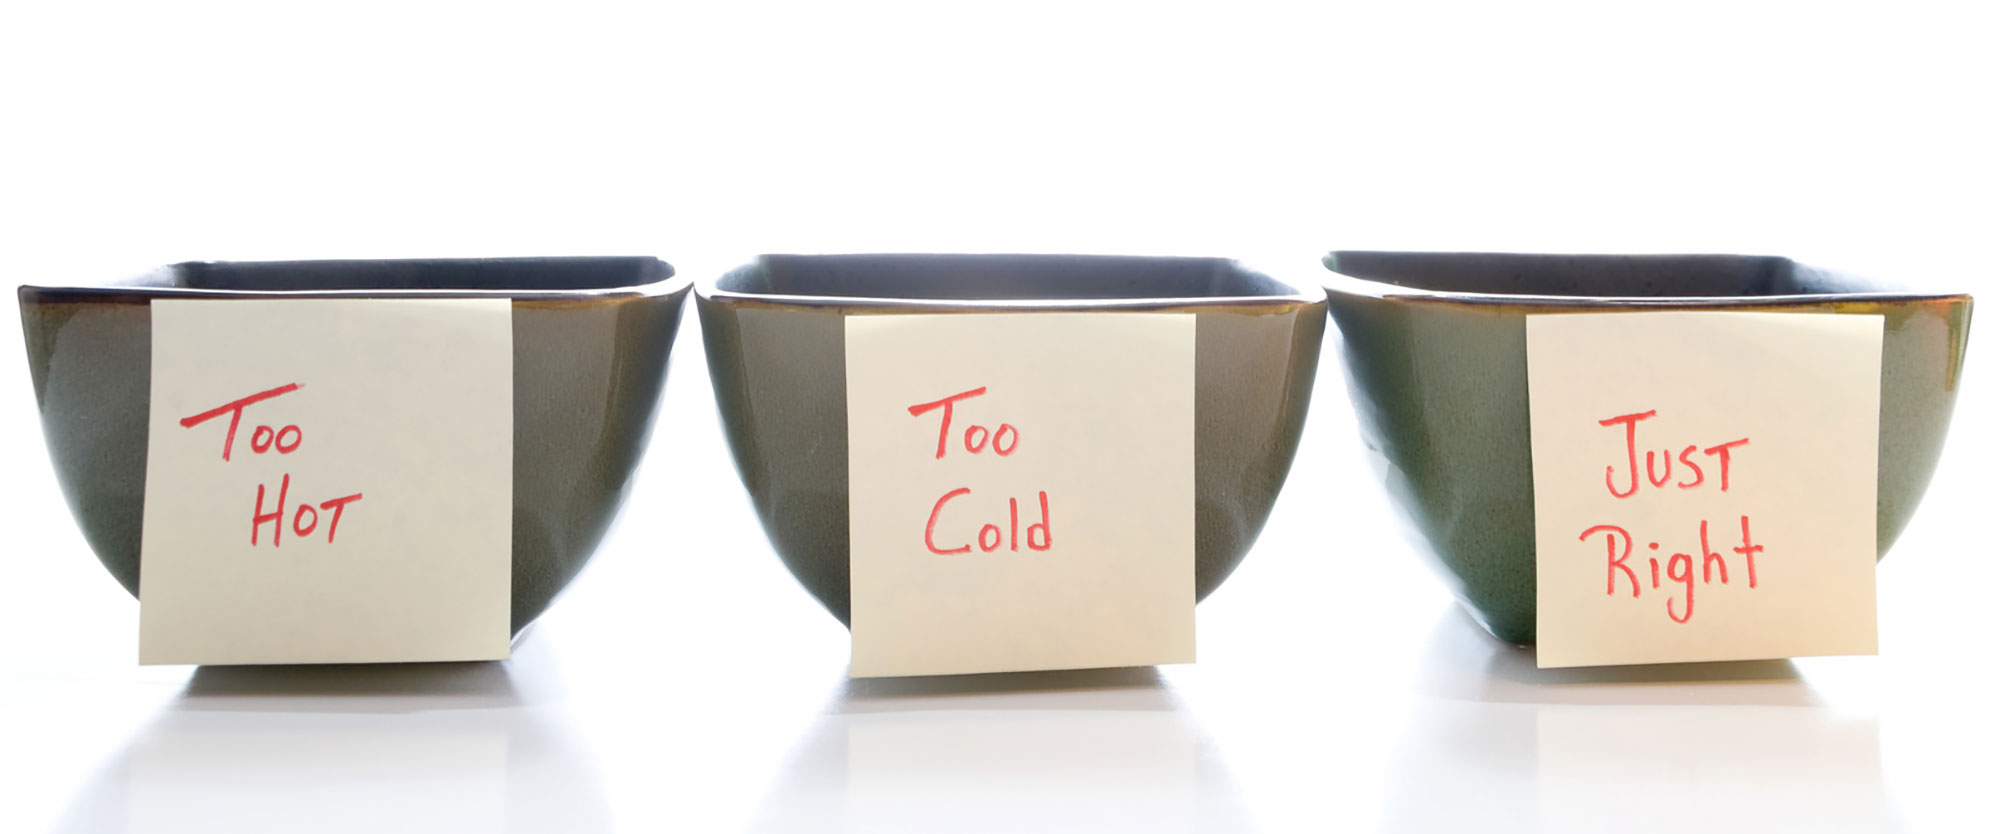 Three bowls of porridge labelled 'Too hot', 'Too cold', 'Just right'.